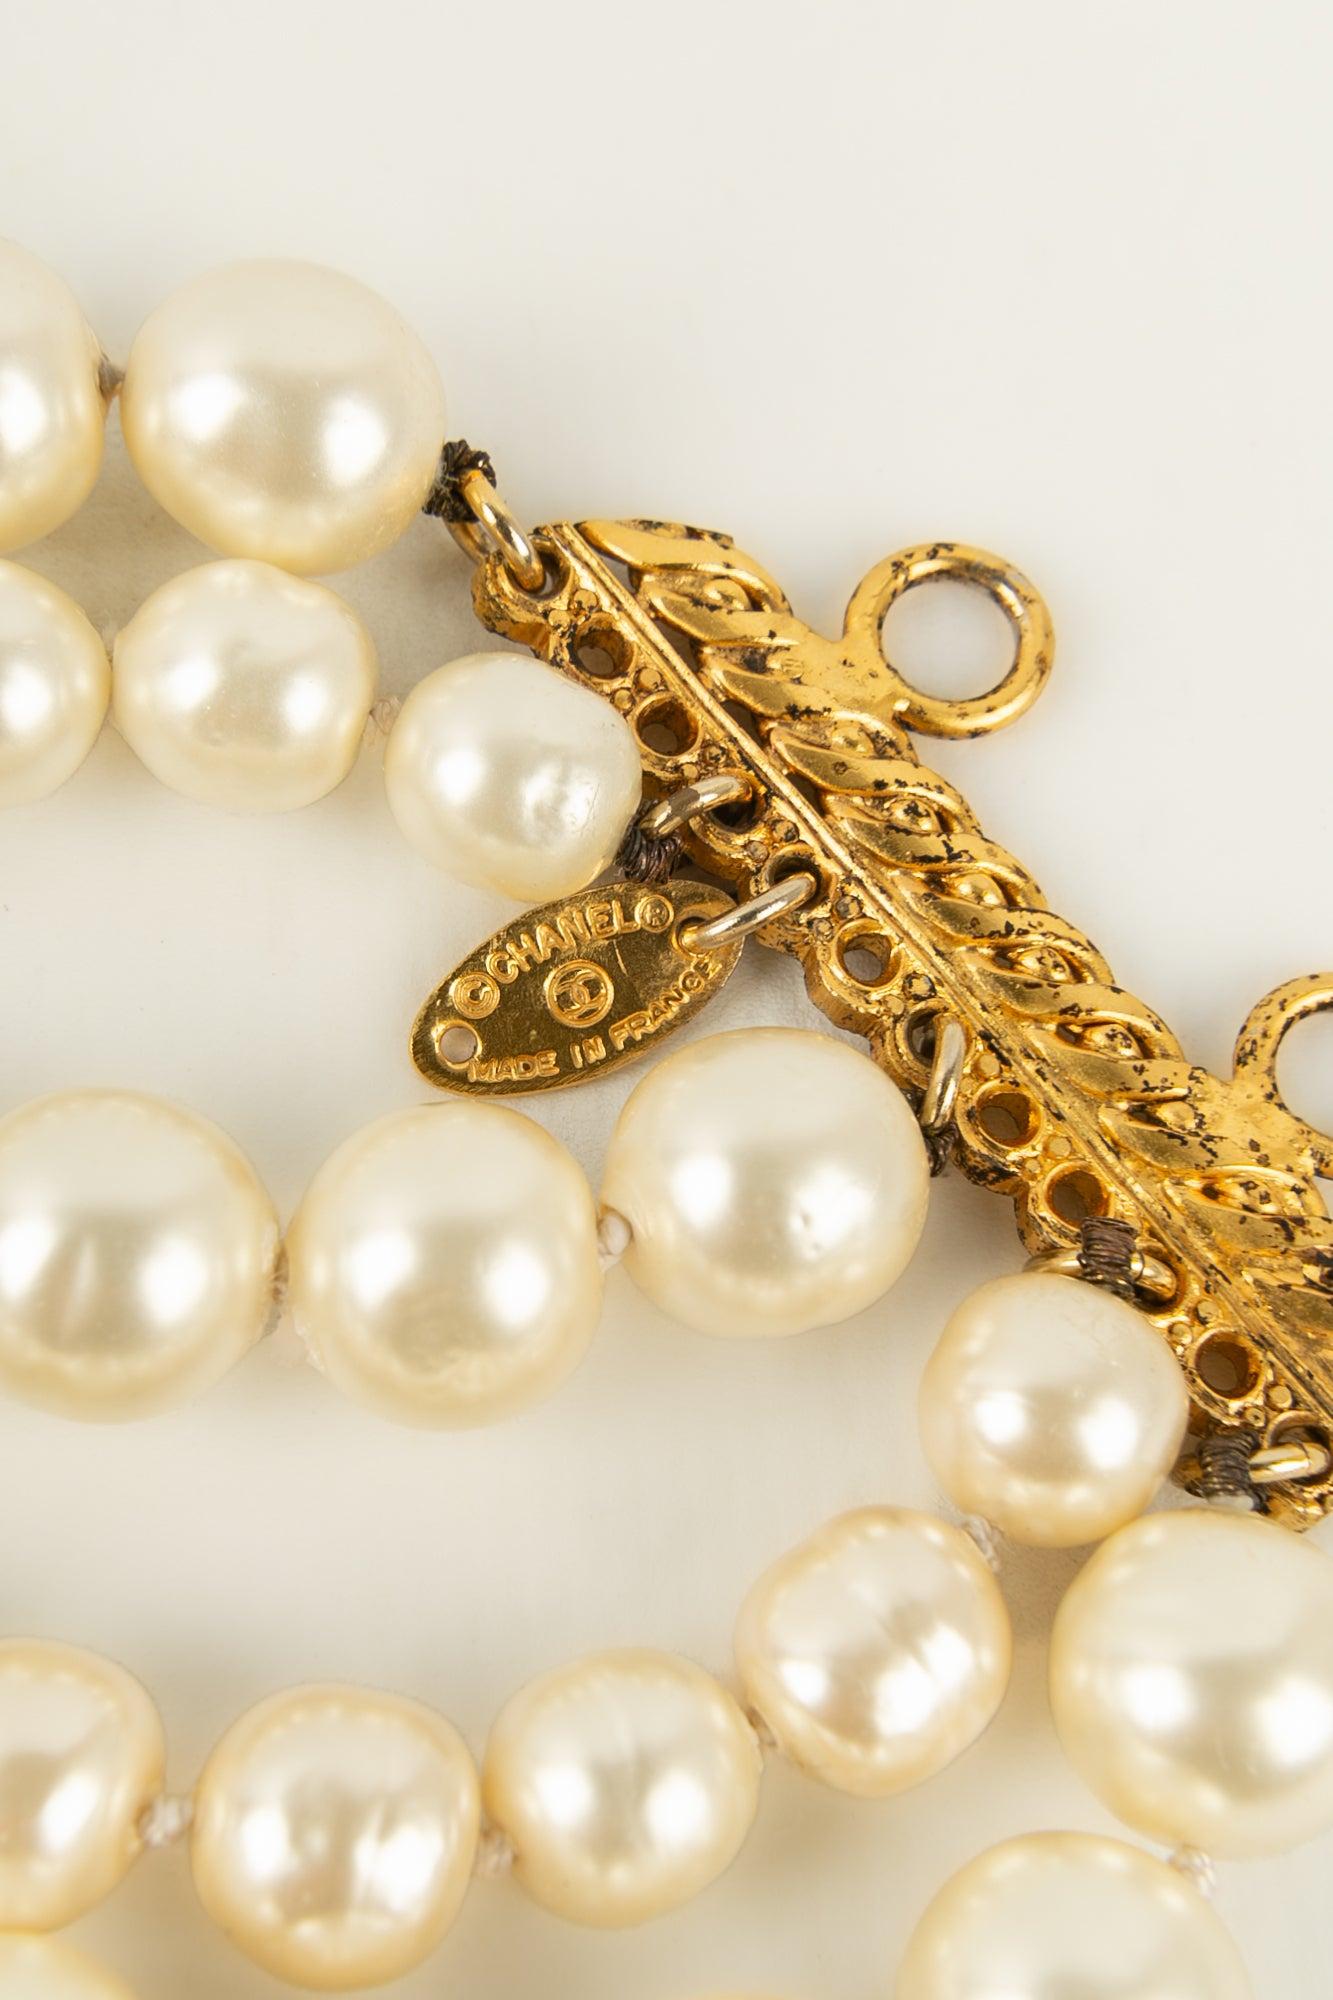 Women's Chanel Bracelet with Pearly Beads and a Fastener in Golden Metal, 1980s For Sale